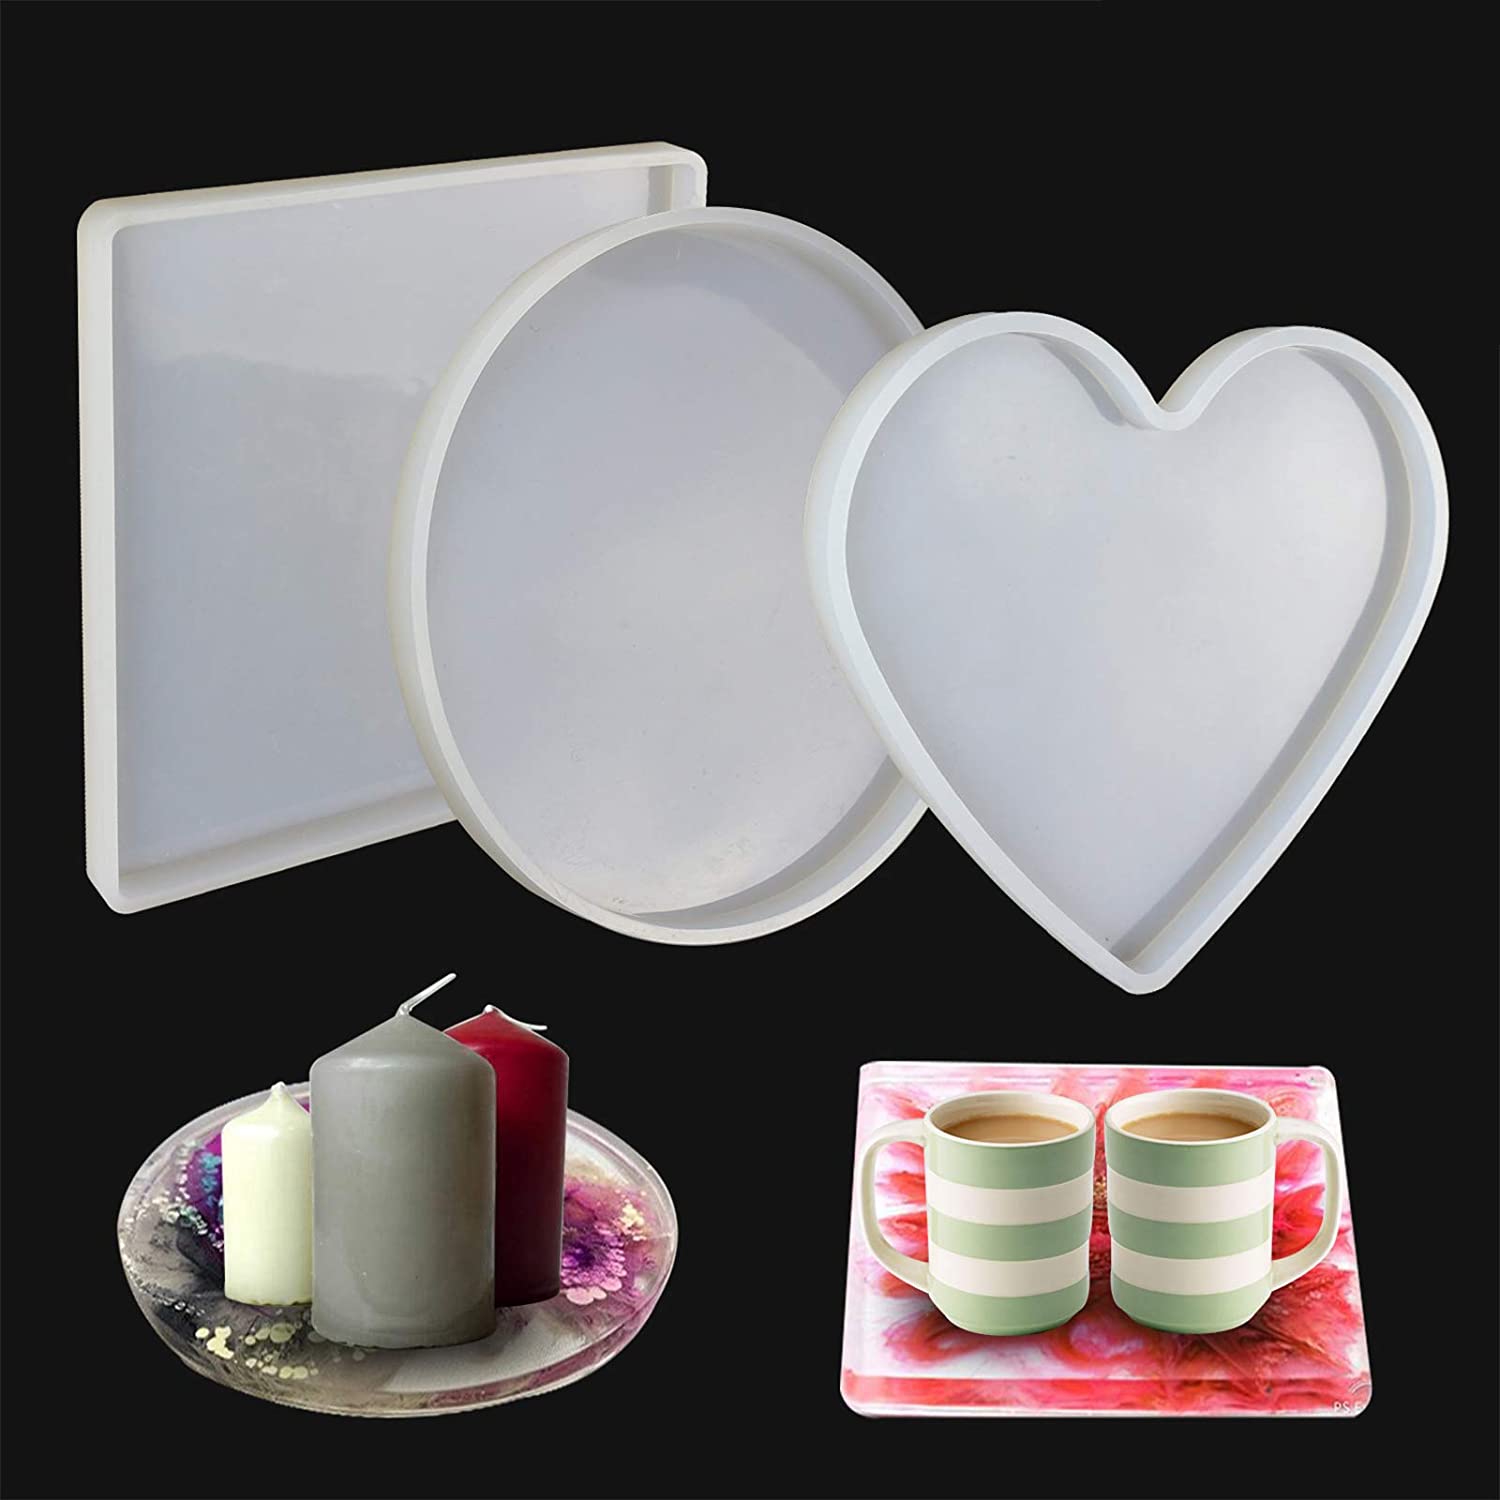 3 Pcs Large Resin Tray Moulds Including Round, Square, Heart Shape, Resin Silicone Molds for Casting Epoxy Resin etc